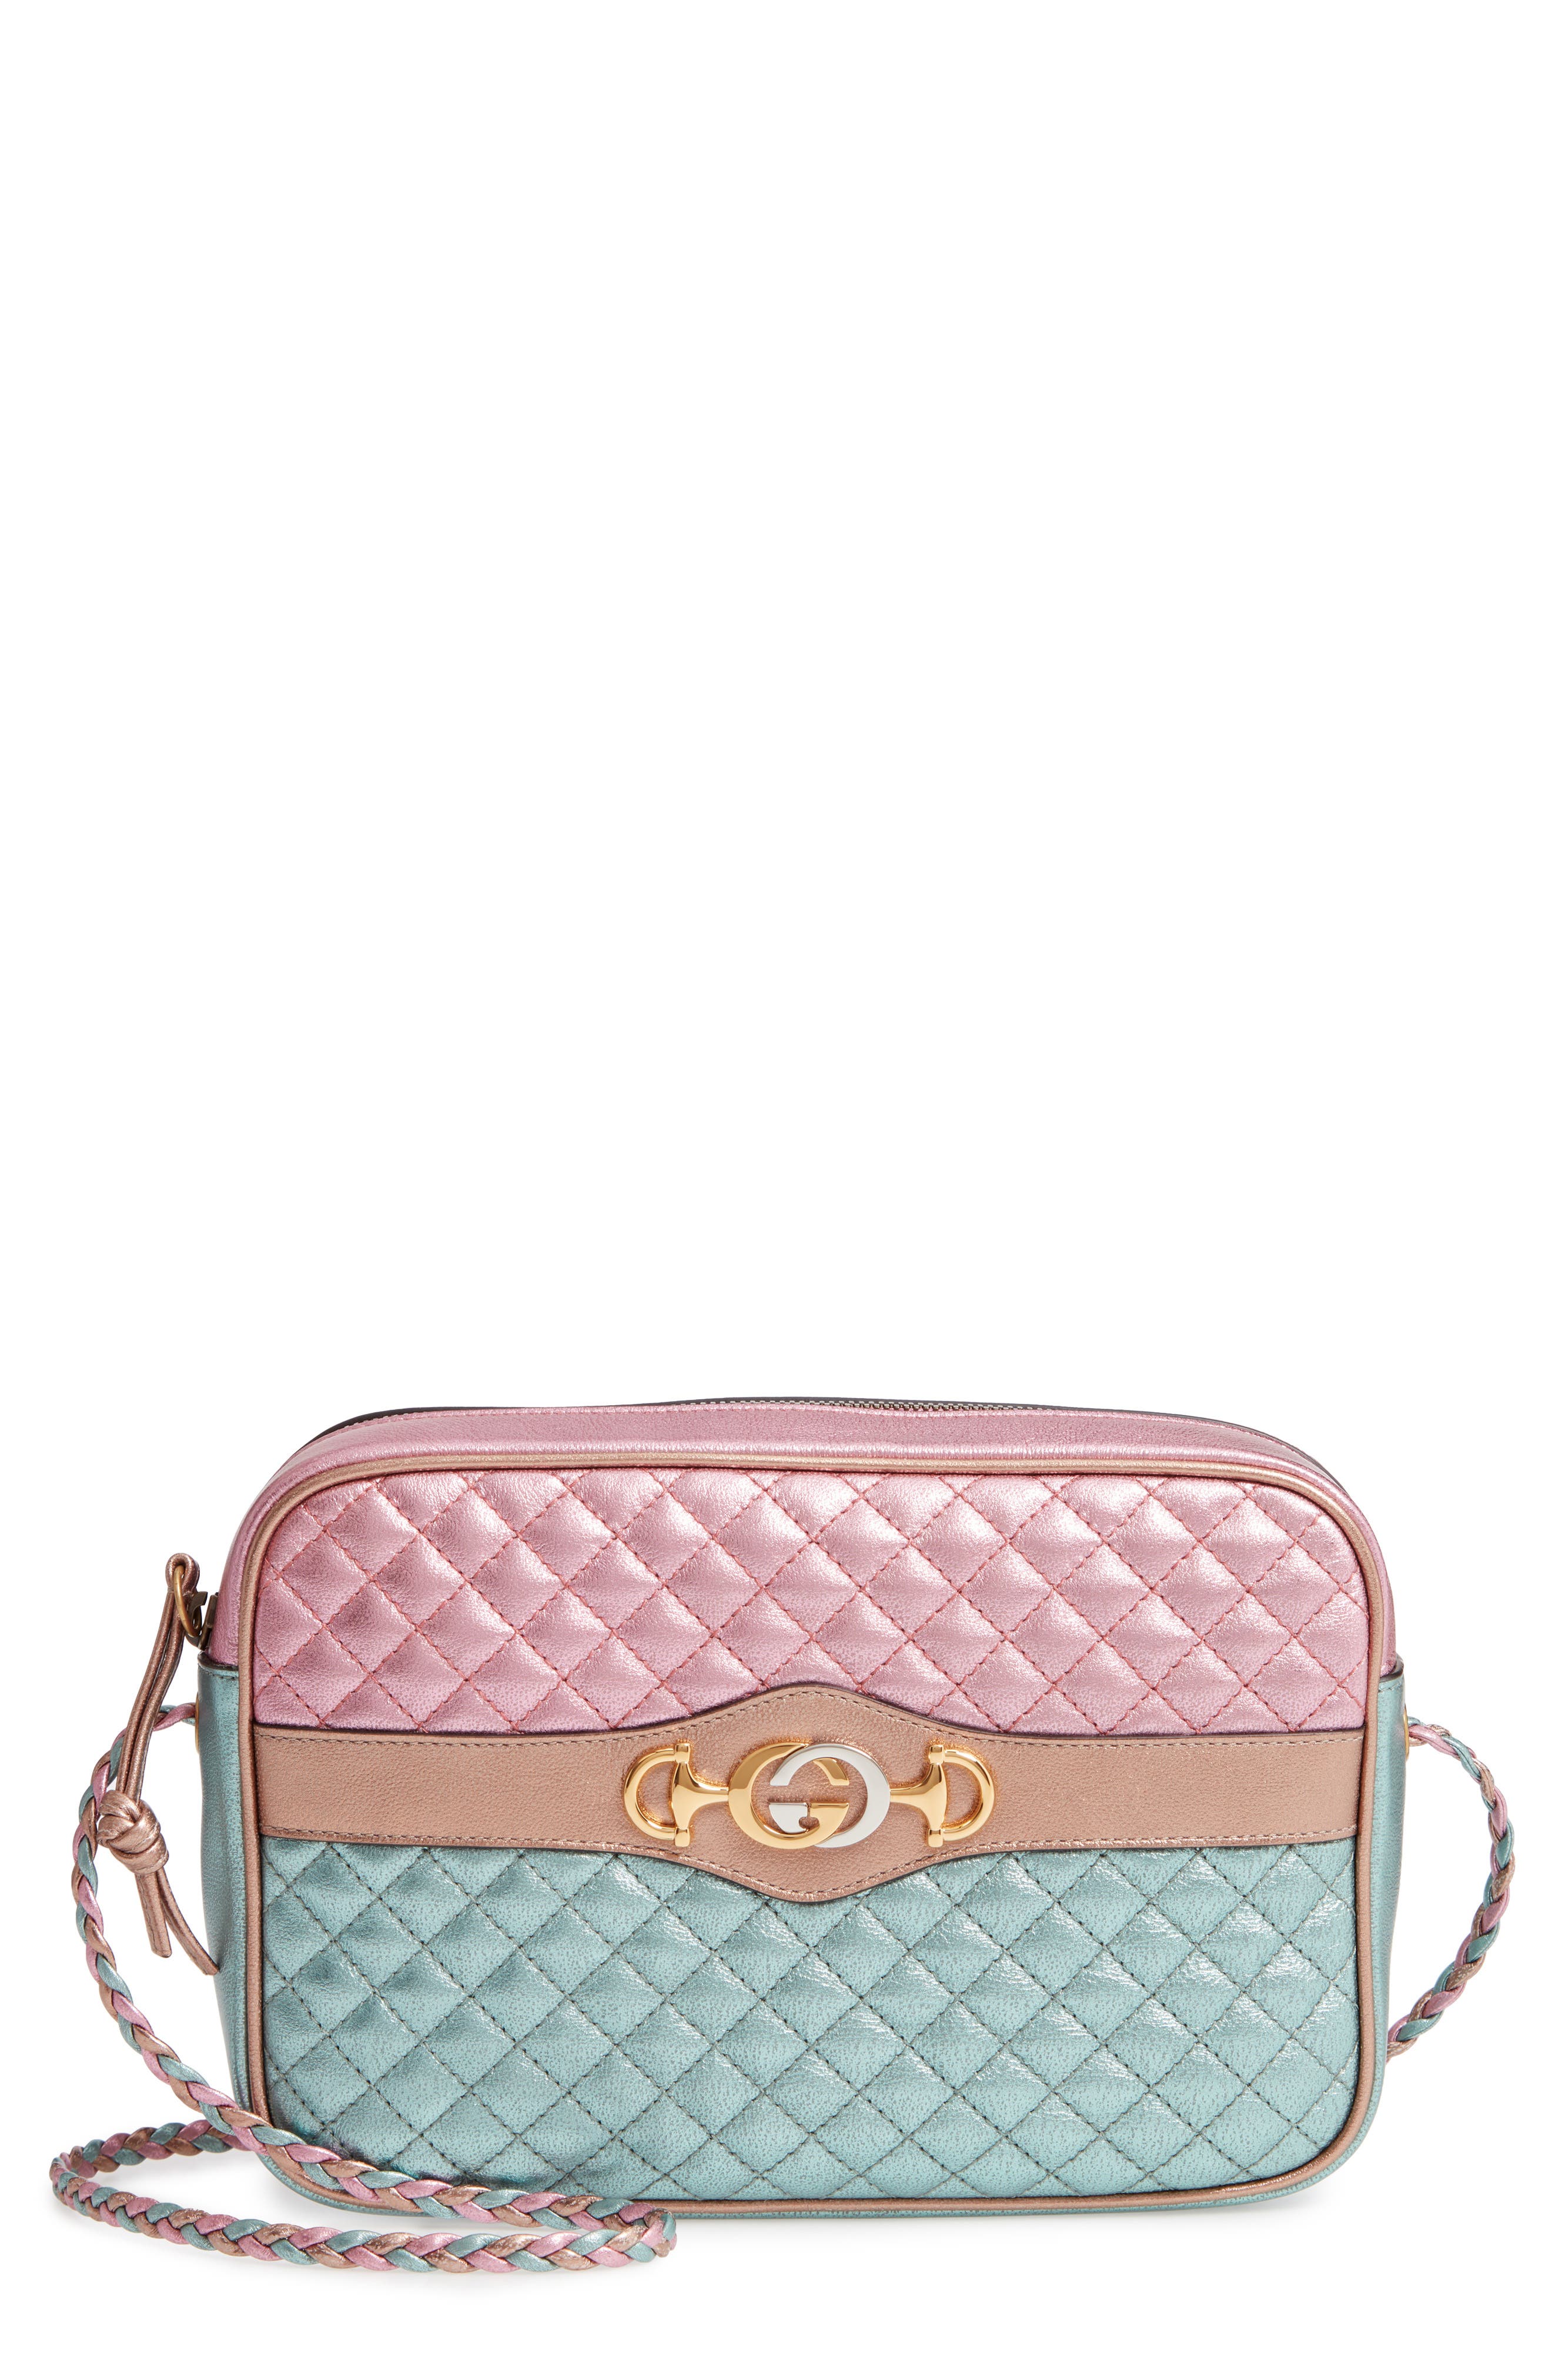 gucci quilted leather bag